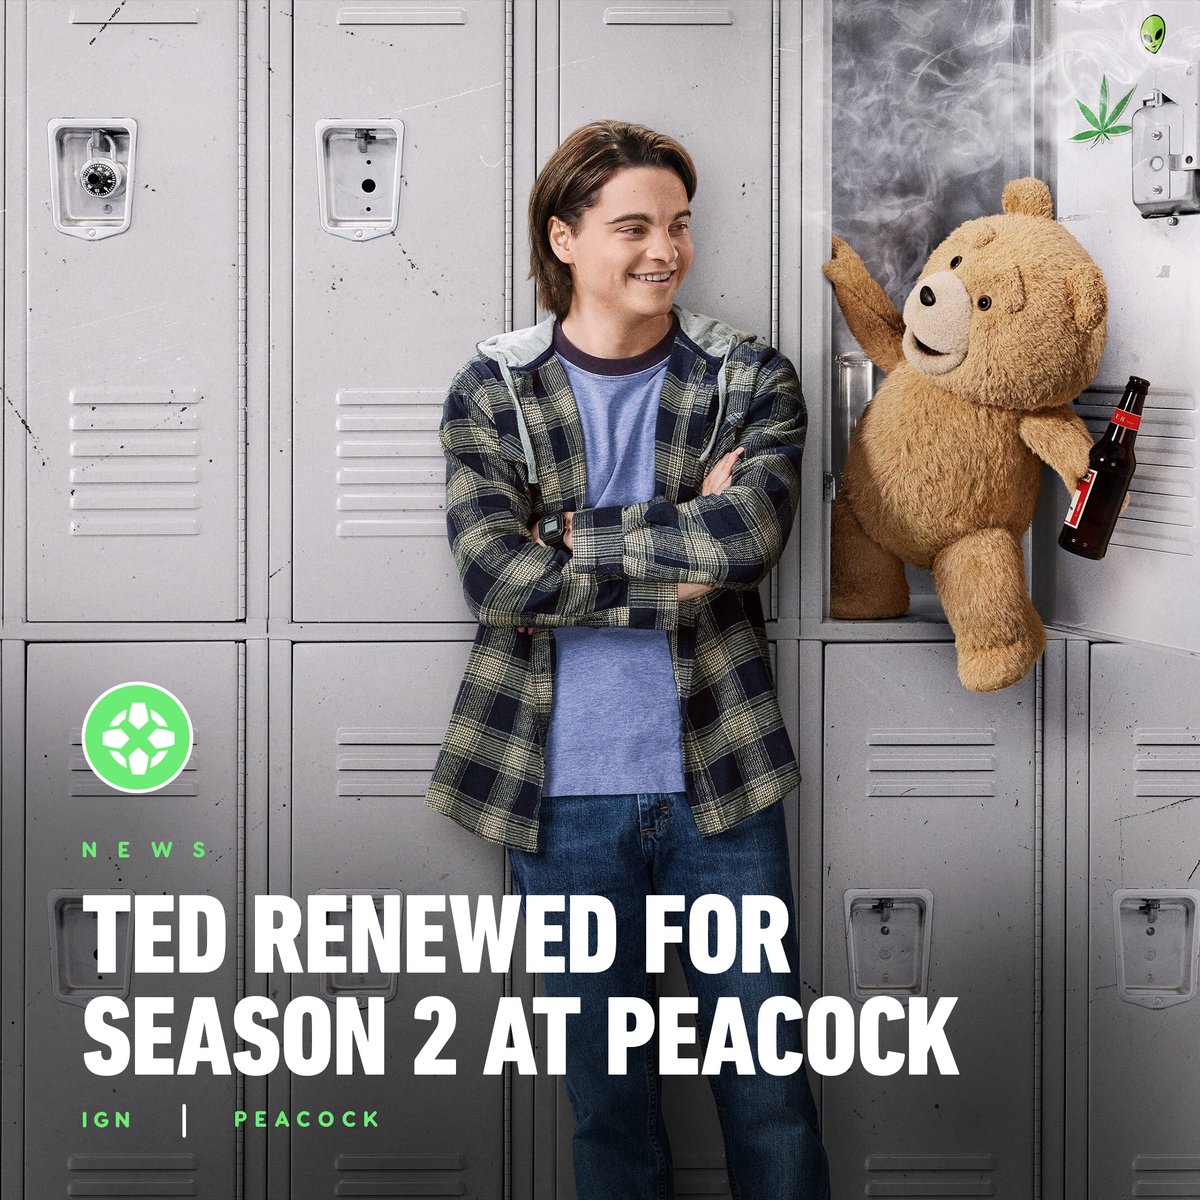 Seth MacFarlane’s raunchy comedy spinoff series, Ted, is returning for Season 2 after Season 1 delivered Peacock’s biggest opening weekend for an original series ever earlier this year. bit.ly/3JUjXVl